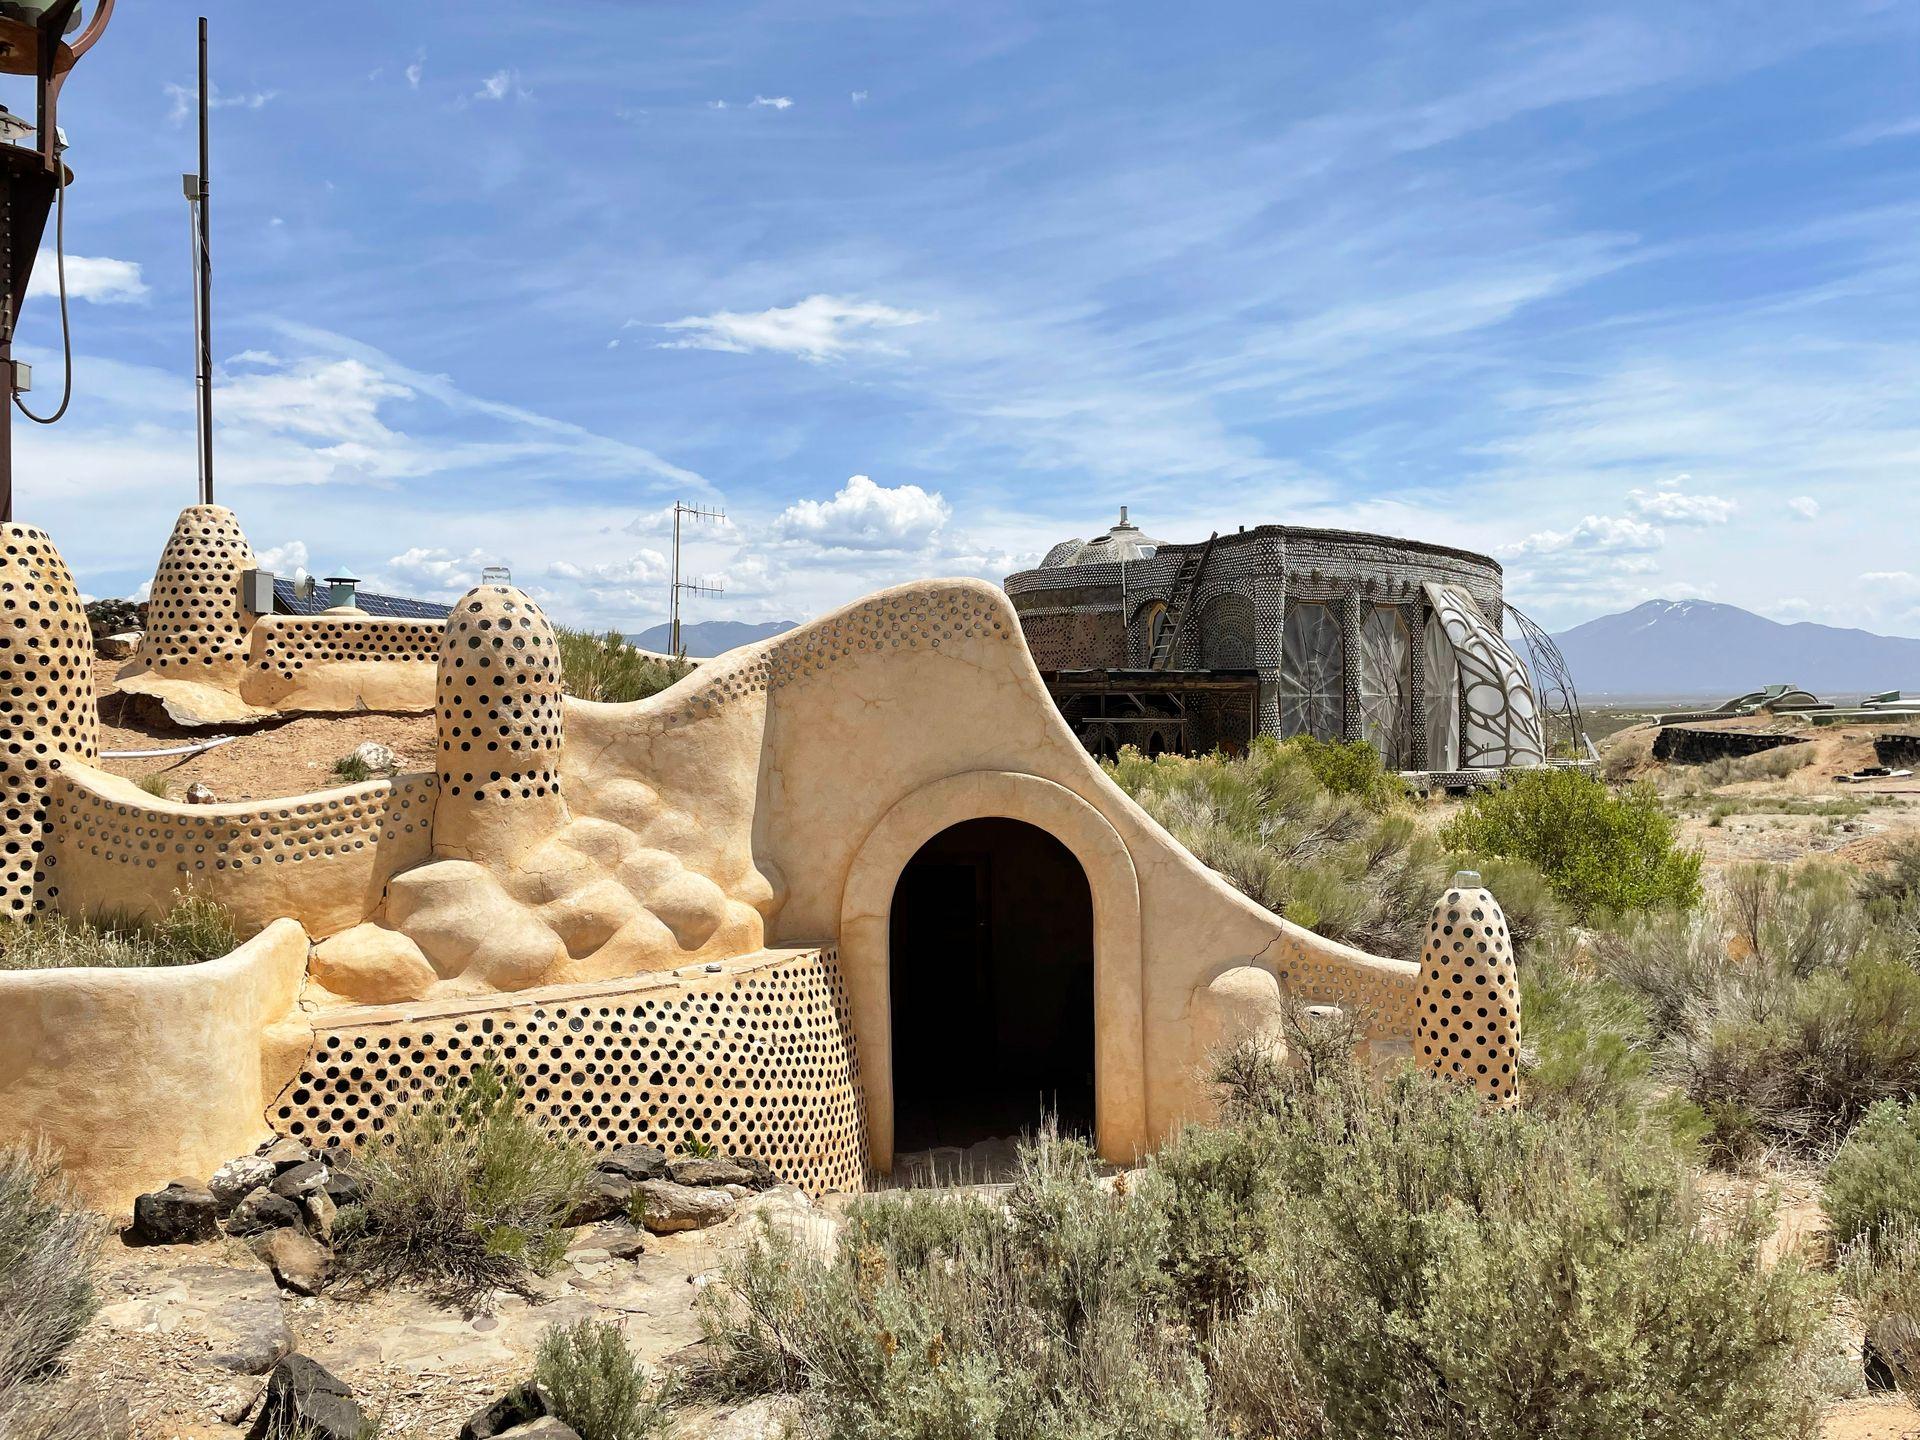 The exterior of the Earthship Biotecture Visitor Center. The building is shaped organically and made with natural and recycled material.